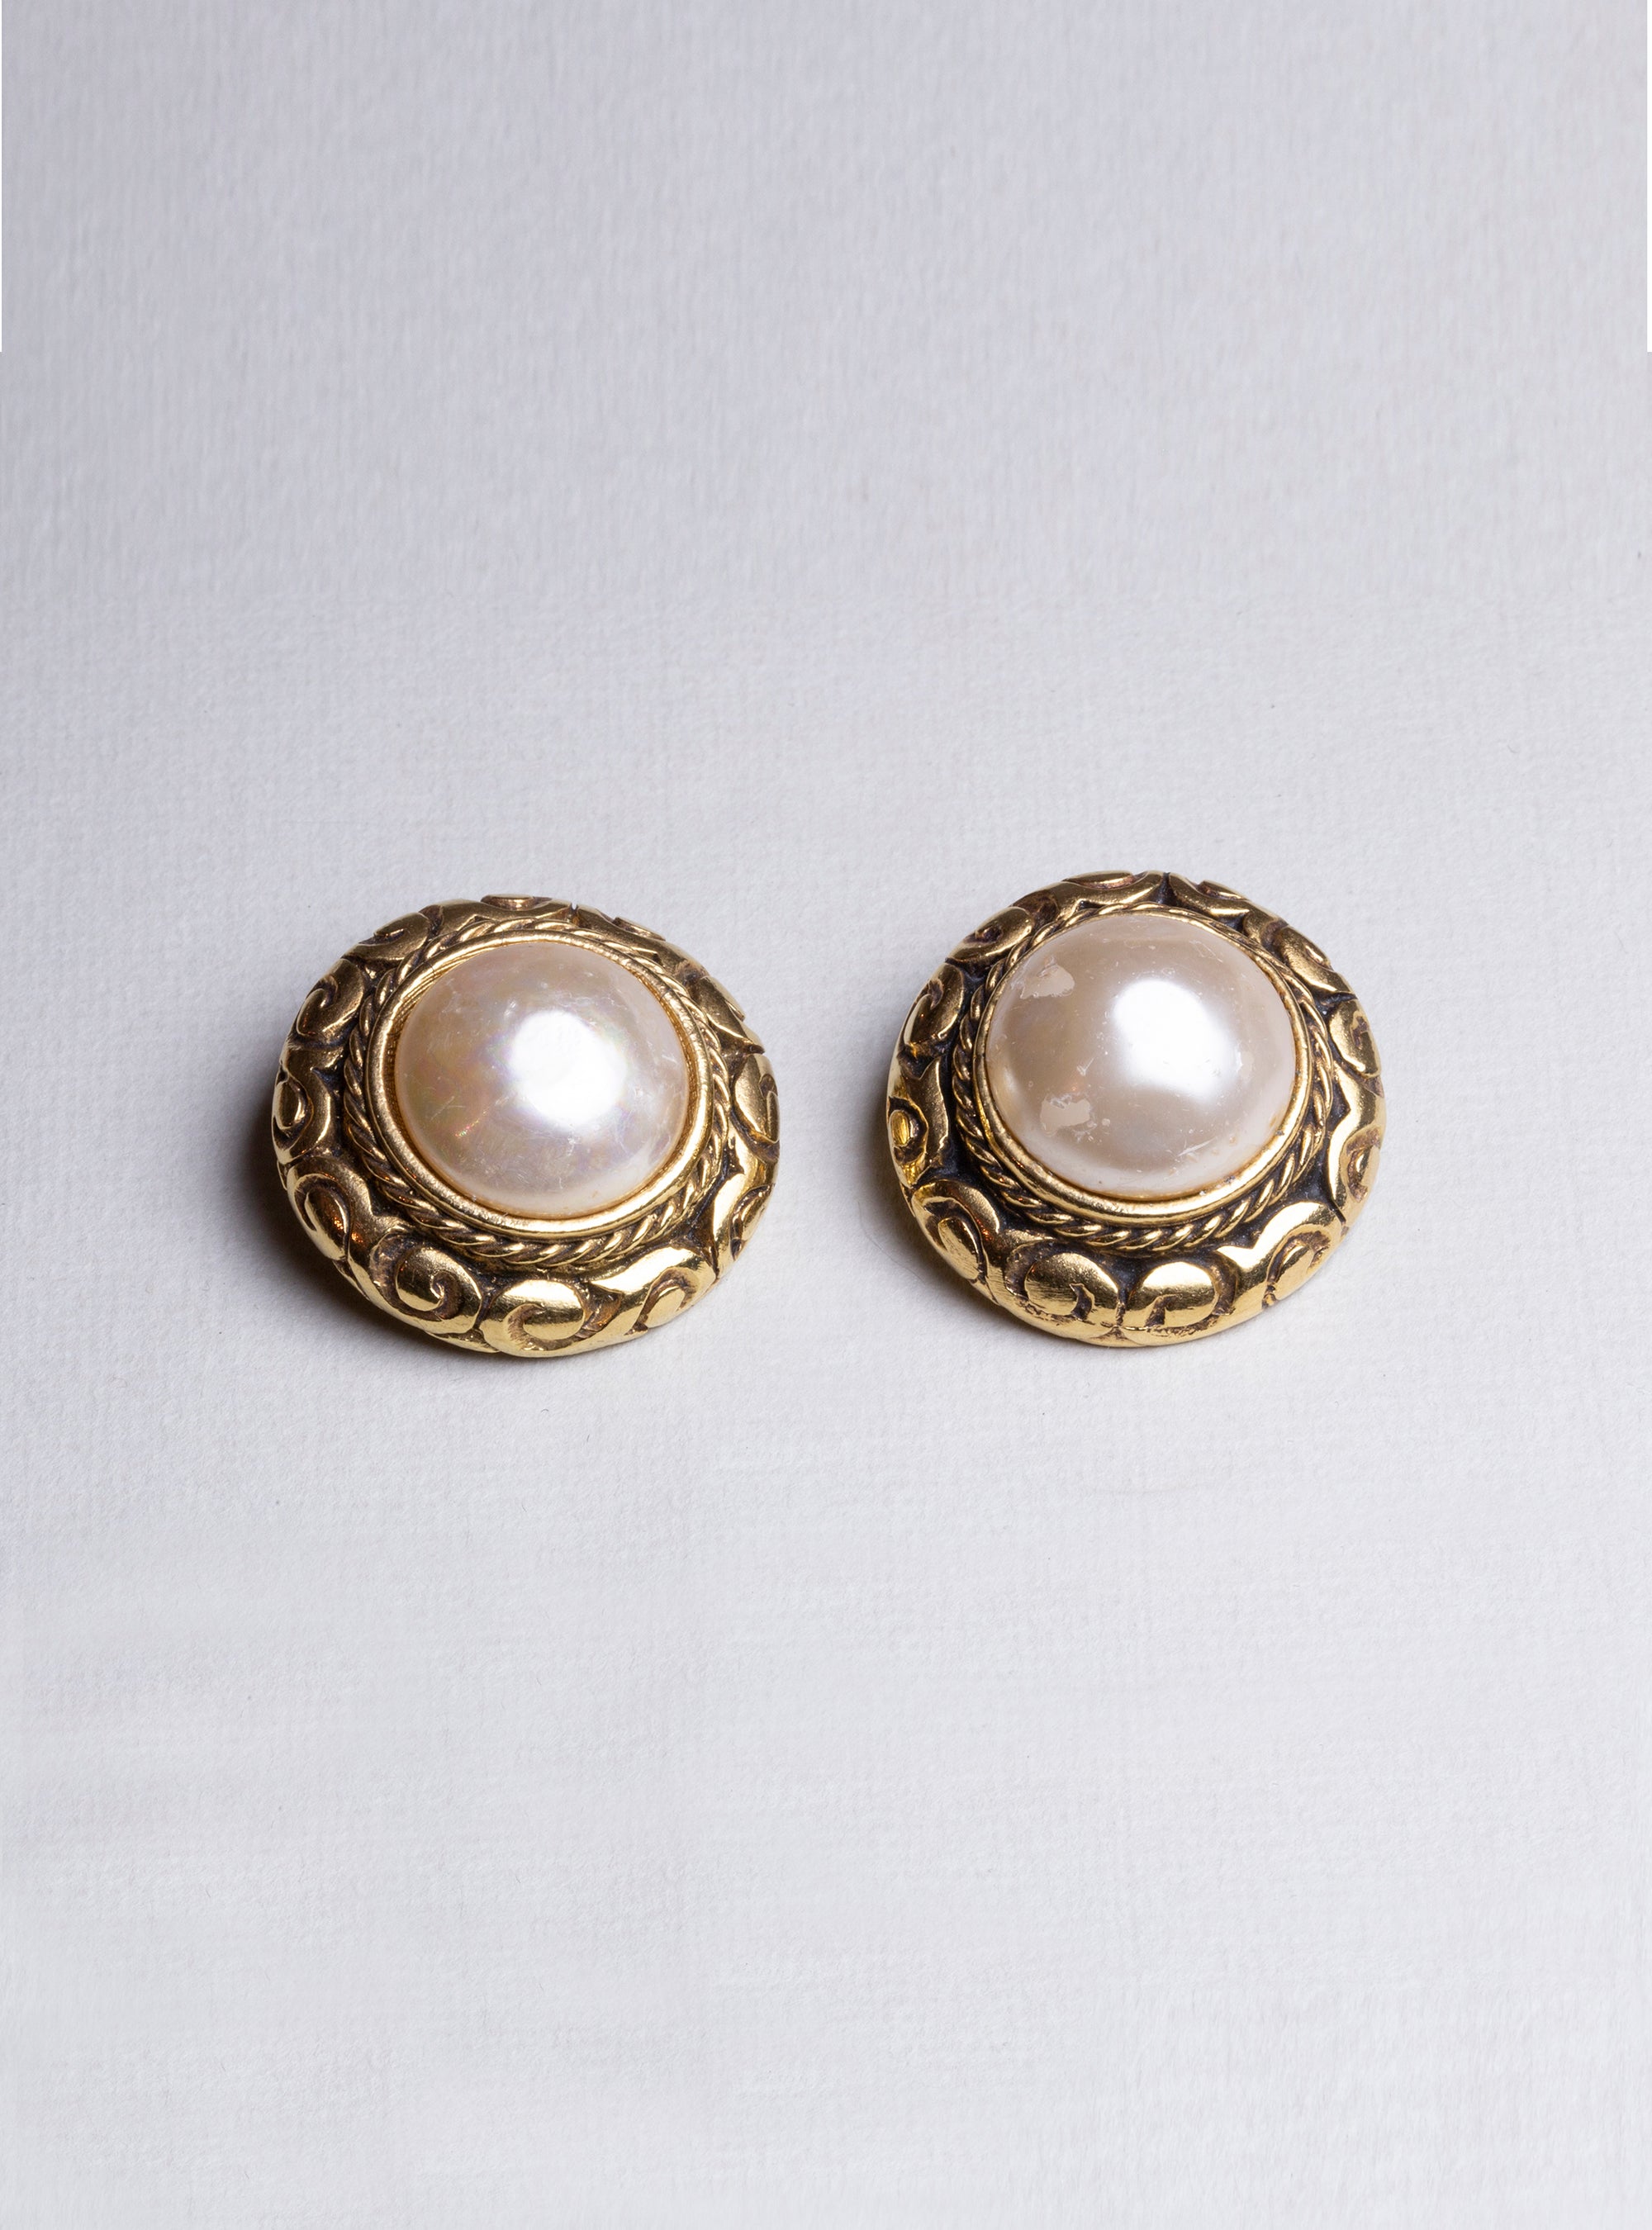 Vintage Chanel Clip-on Earrings with Pearls